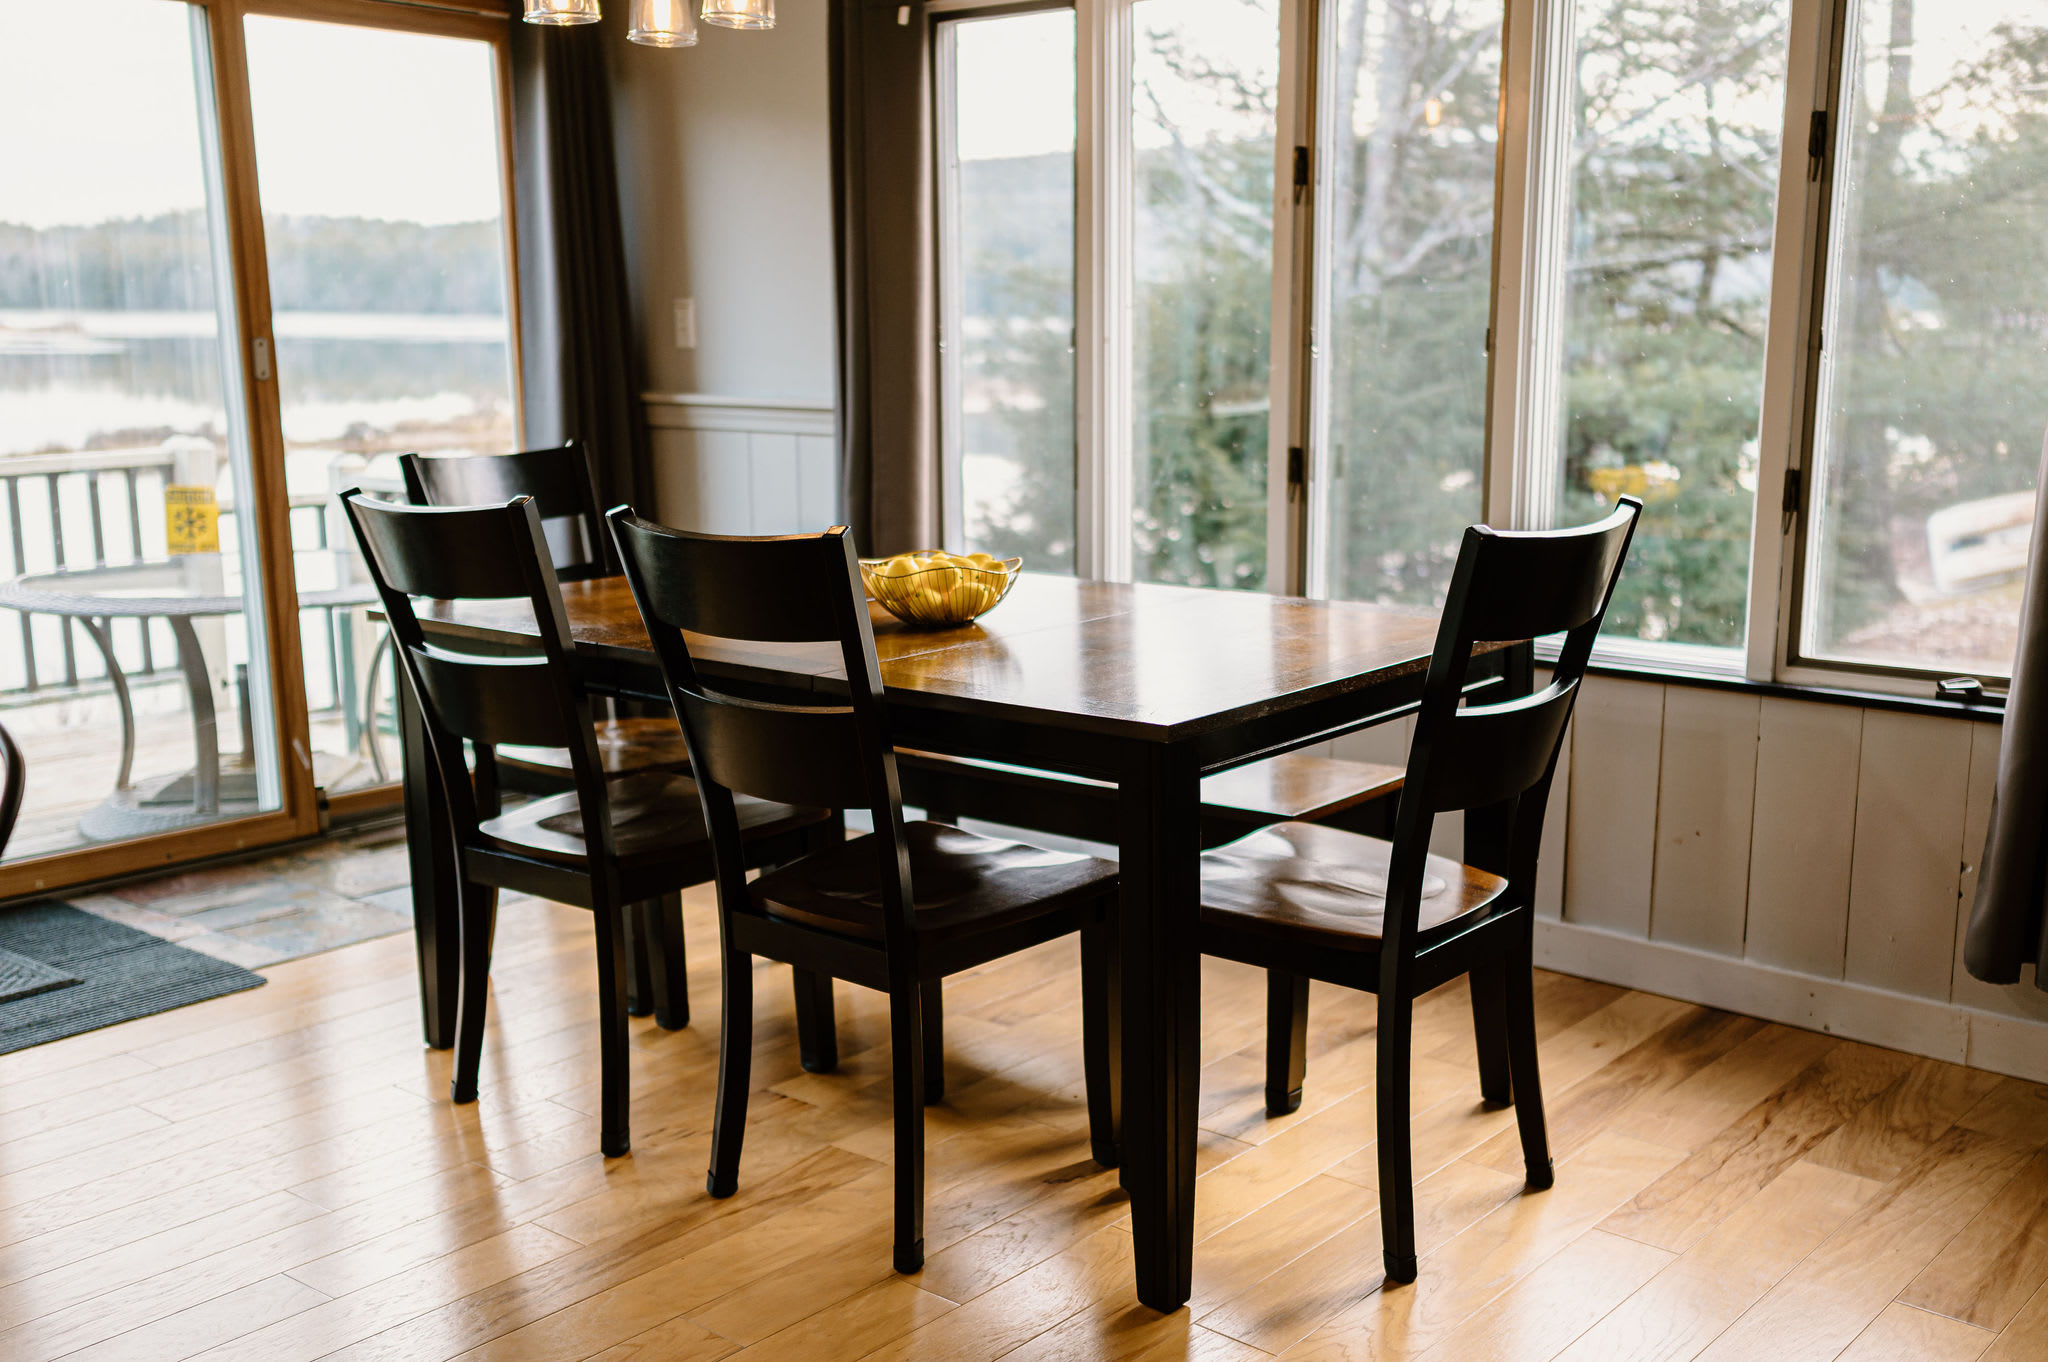 Seating for 12 people total at kitchen table and island